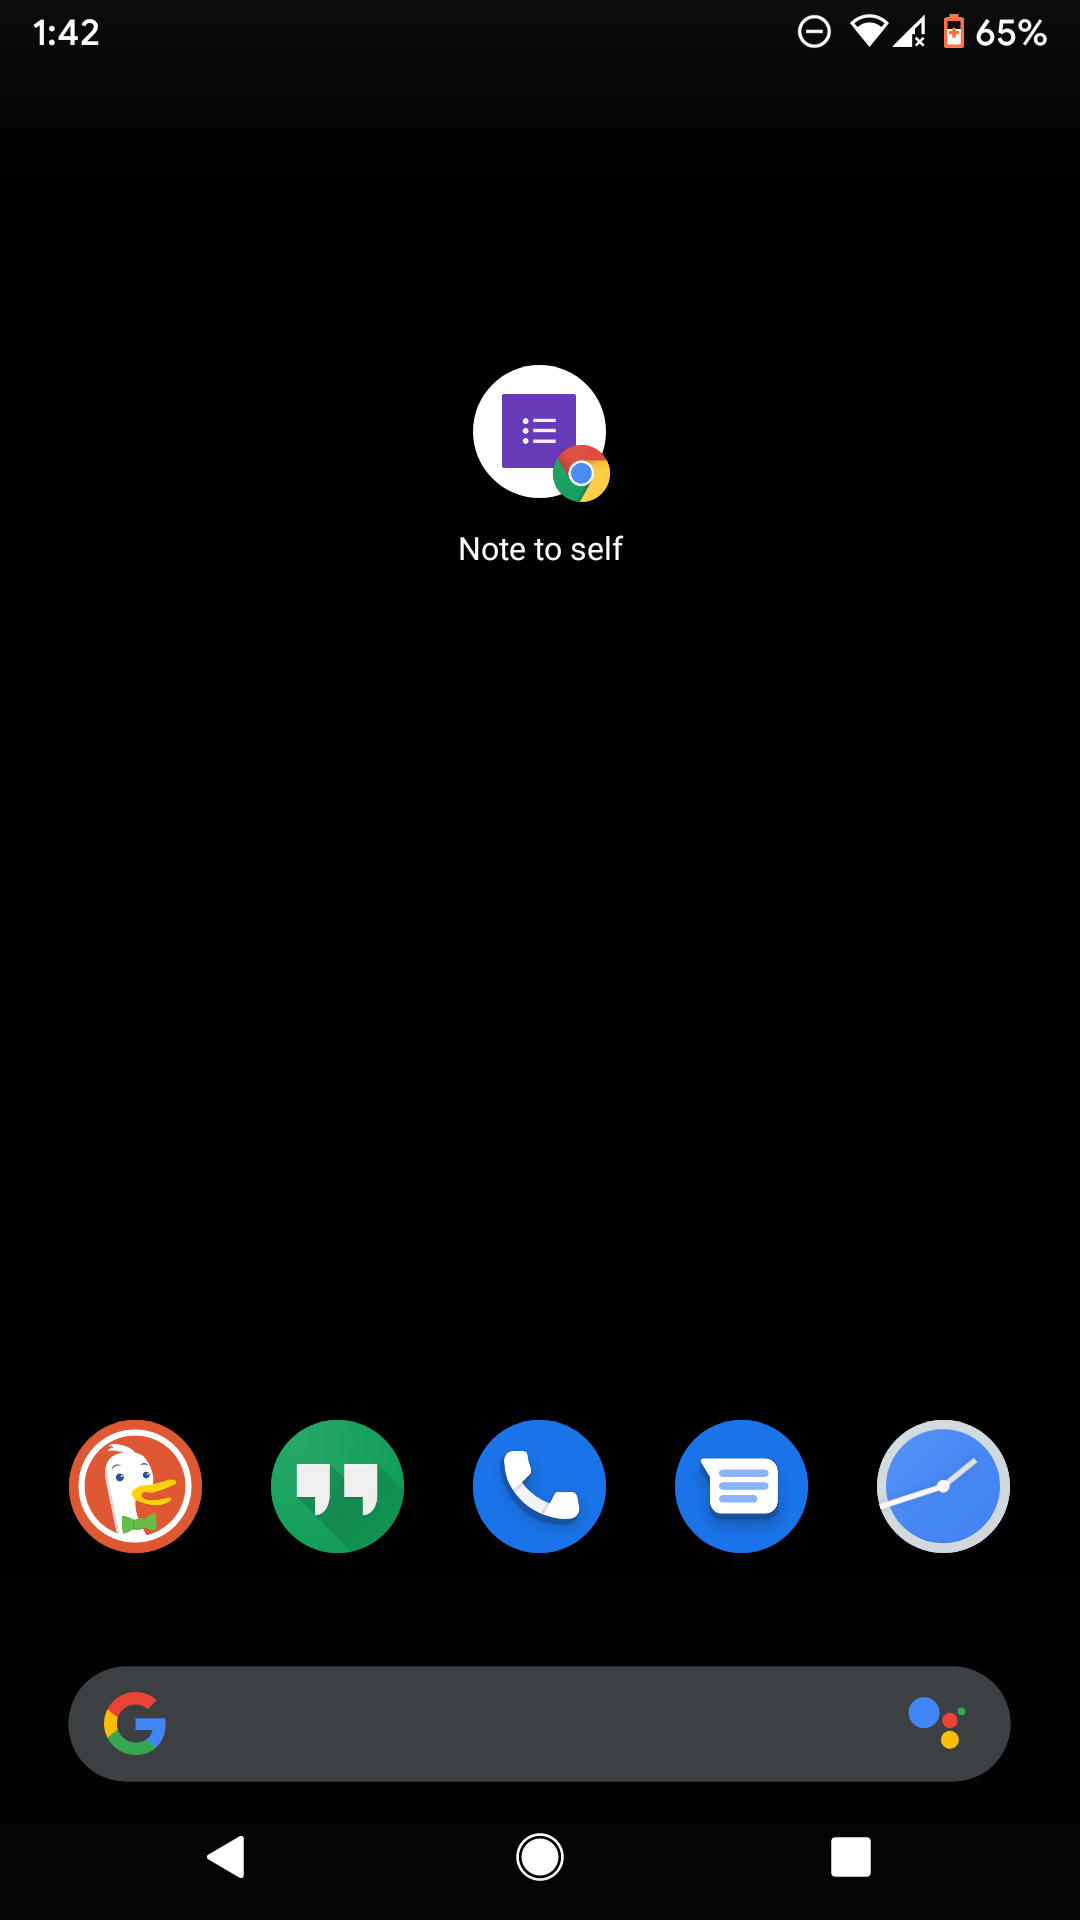 Screenshot of an Android phone